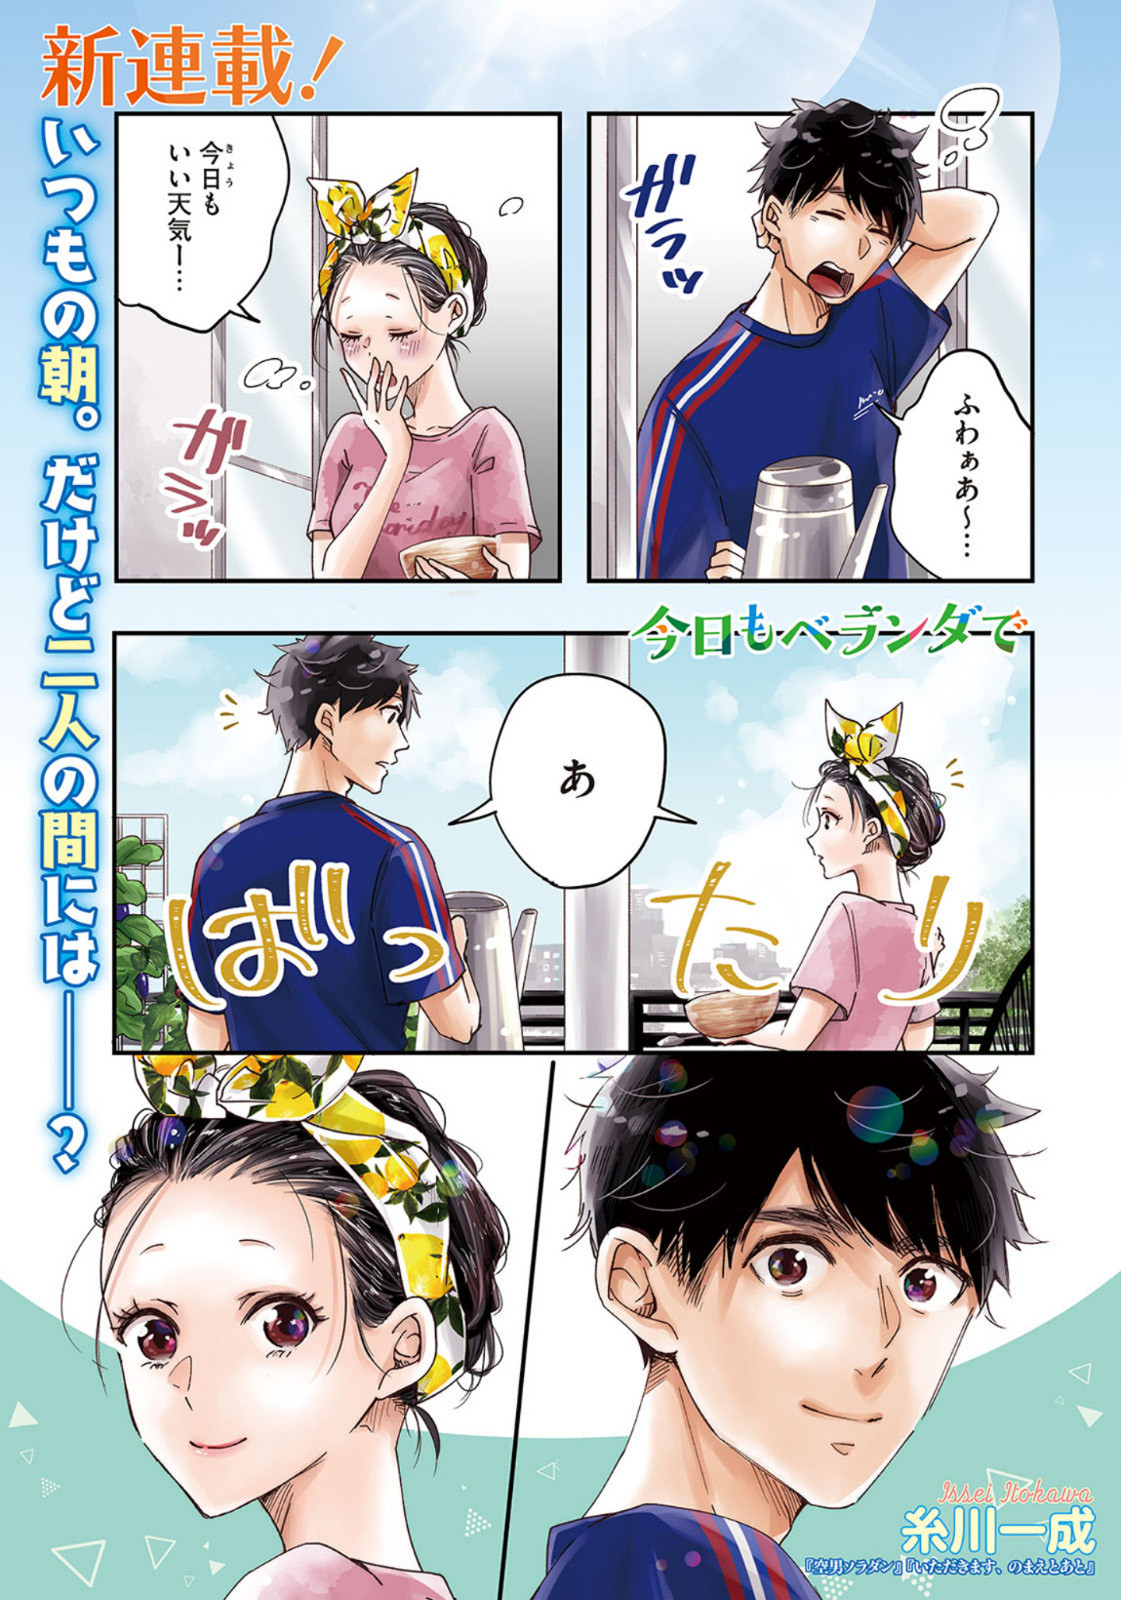 Weekly Morning - 週刊モーニング - Chapter 2022-42 - Page 3